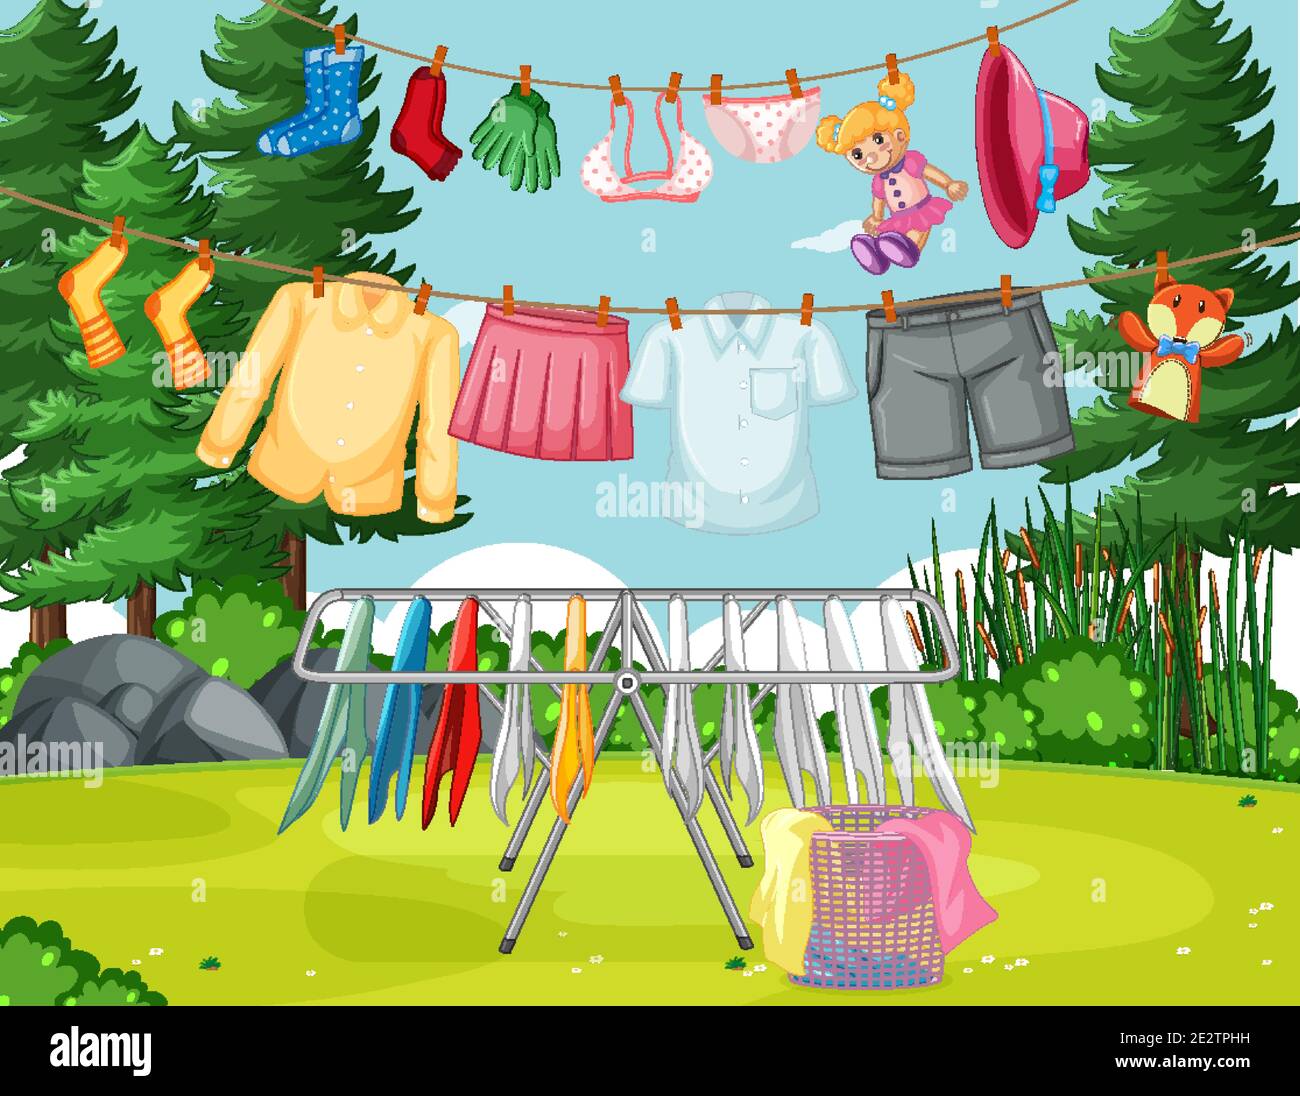 Clothes Hanging On Line In The Yard Illustration Stock Vector Image